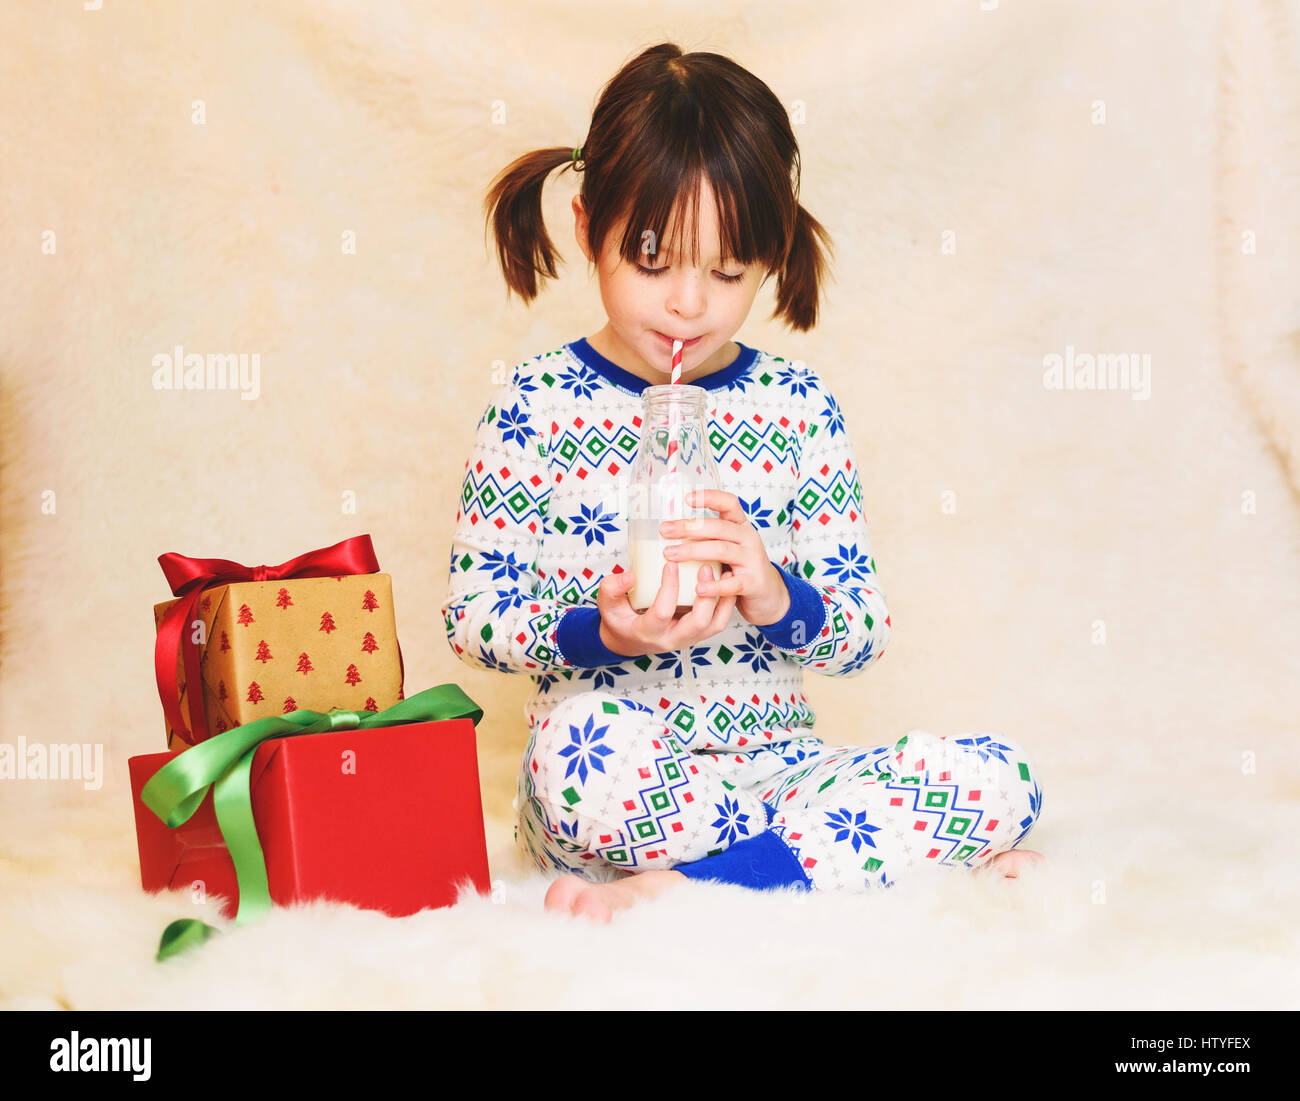 Girl with Christmas gifts drinking bottle of milk Stock Photo